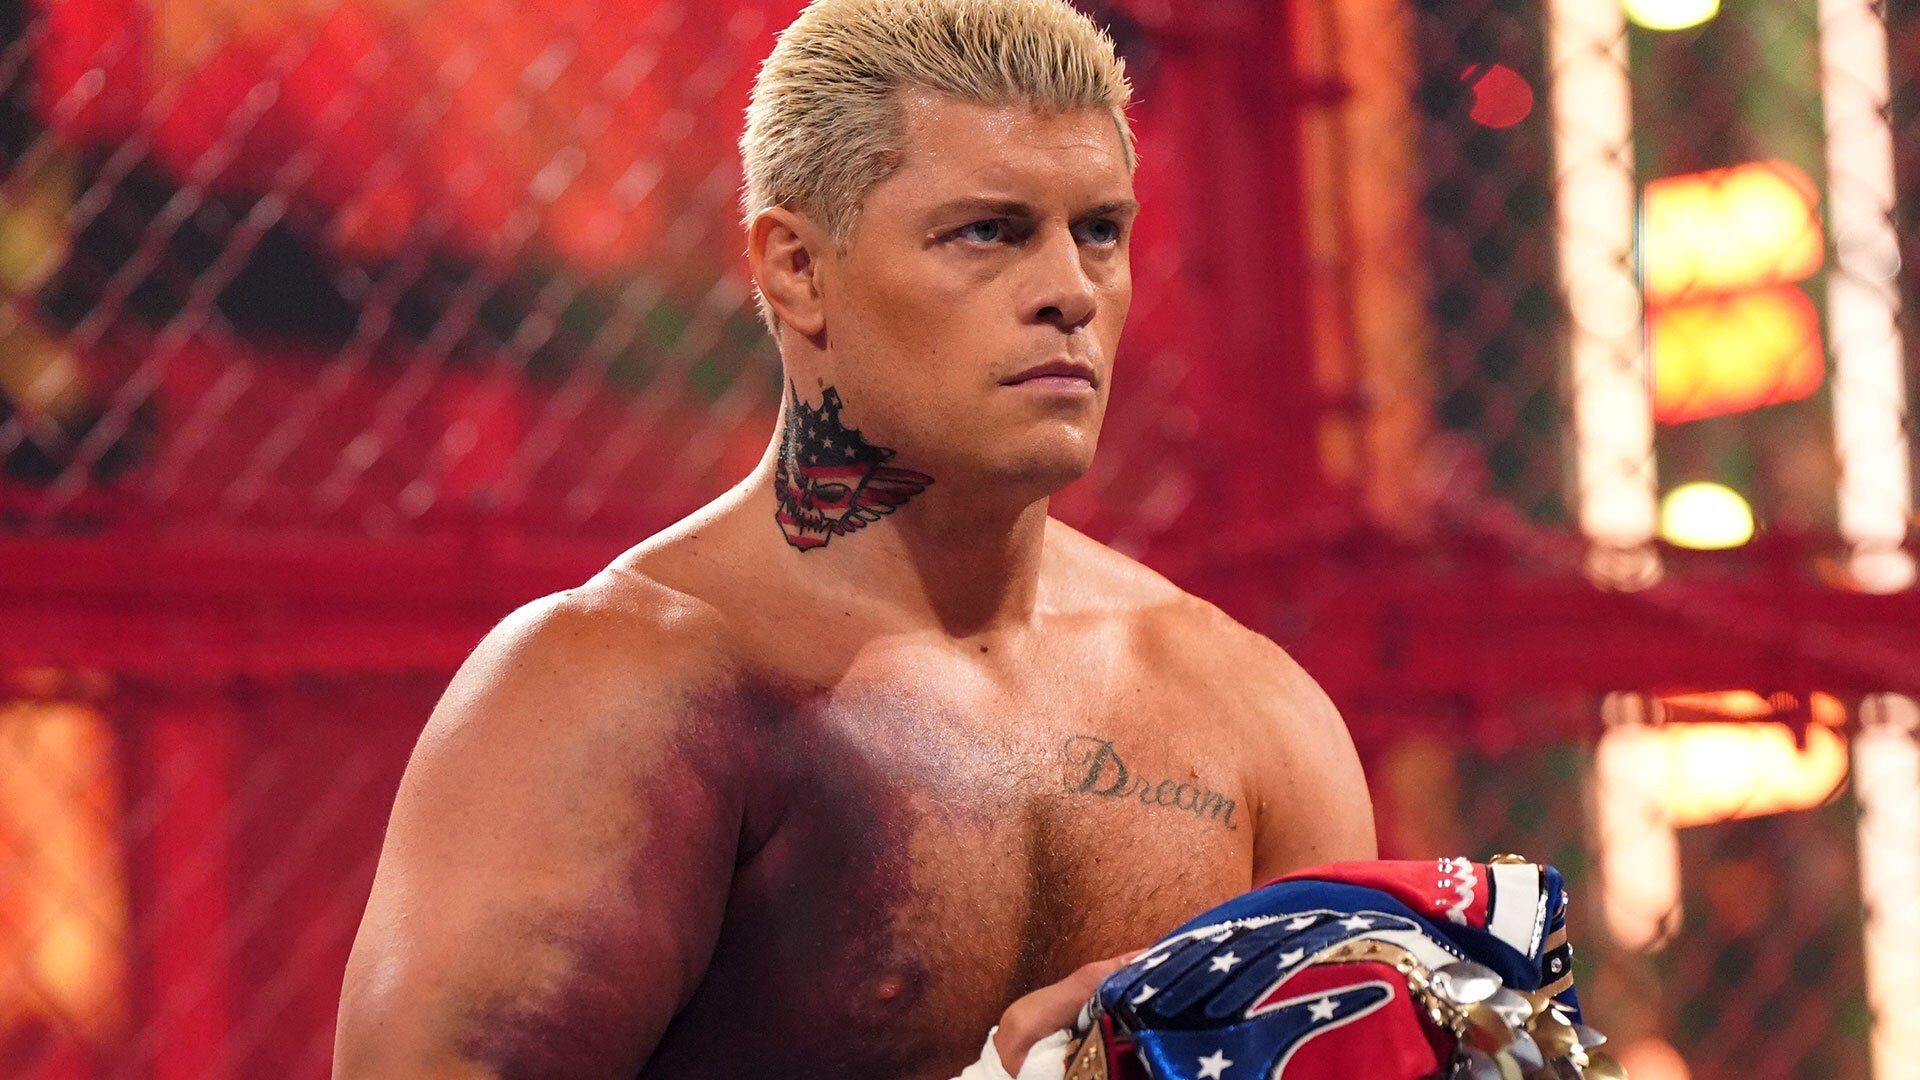 Cody Rhodes To Undergo Surgery & Will Be Out Of Action For Months